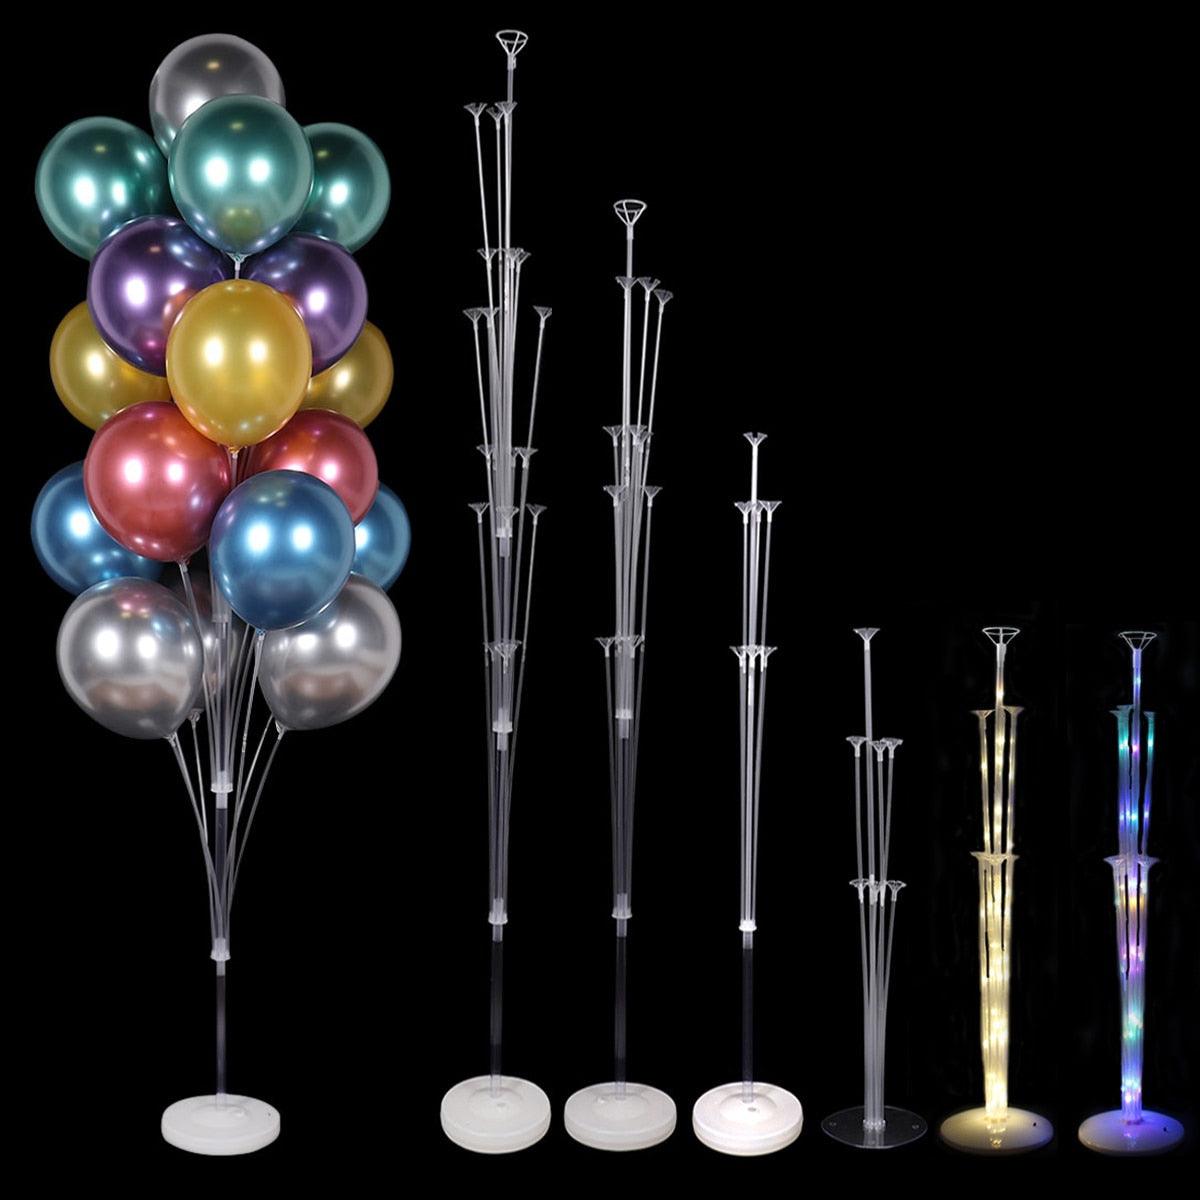 Balloons Stand Balloon Holder Column Confetti Ballons Wedding Birthday Party Decoration Kids Baby Shower Balons Support Supplies